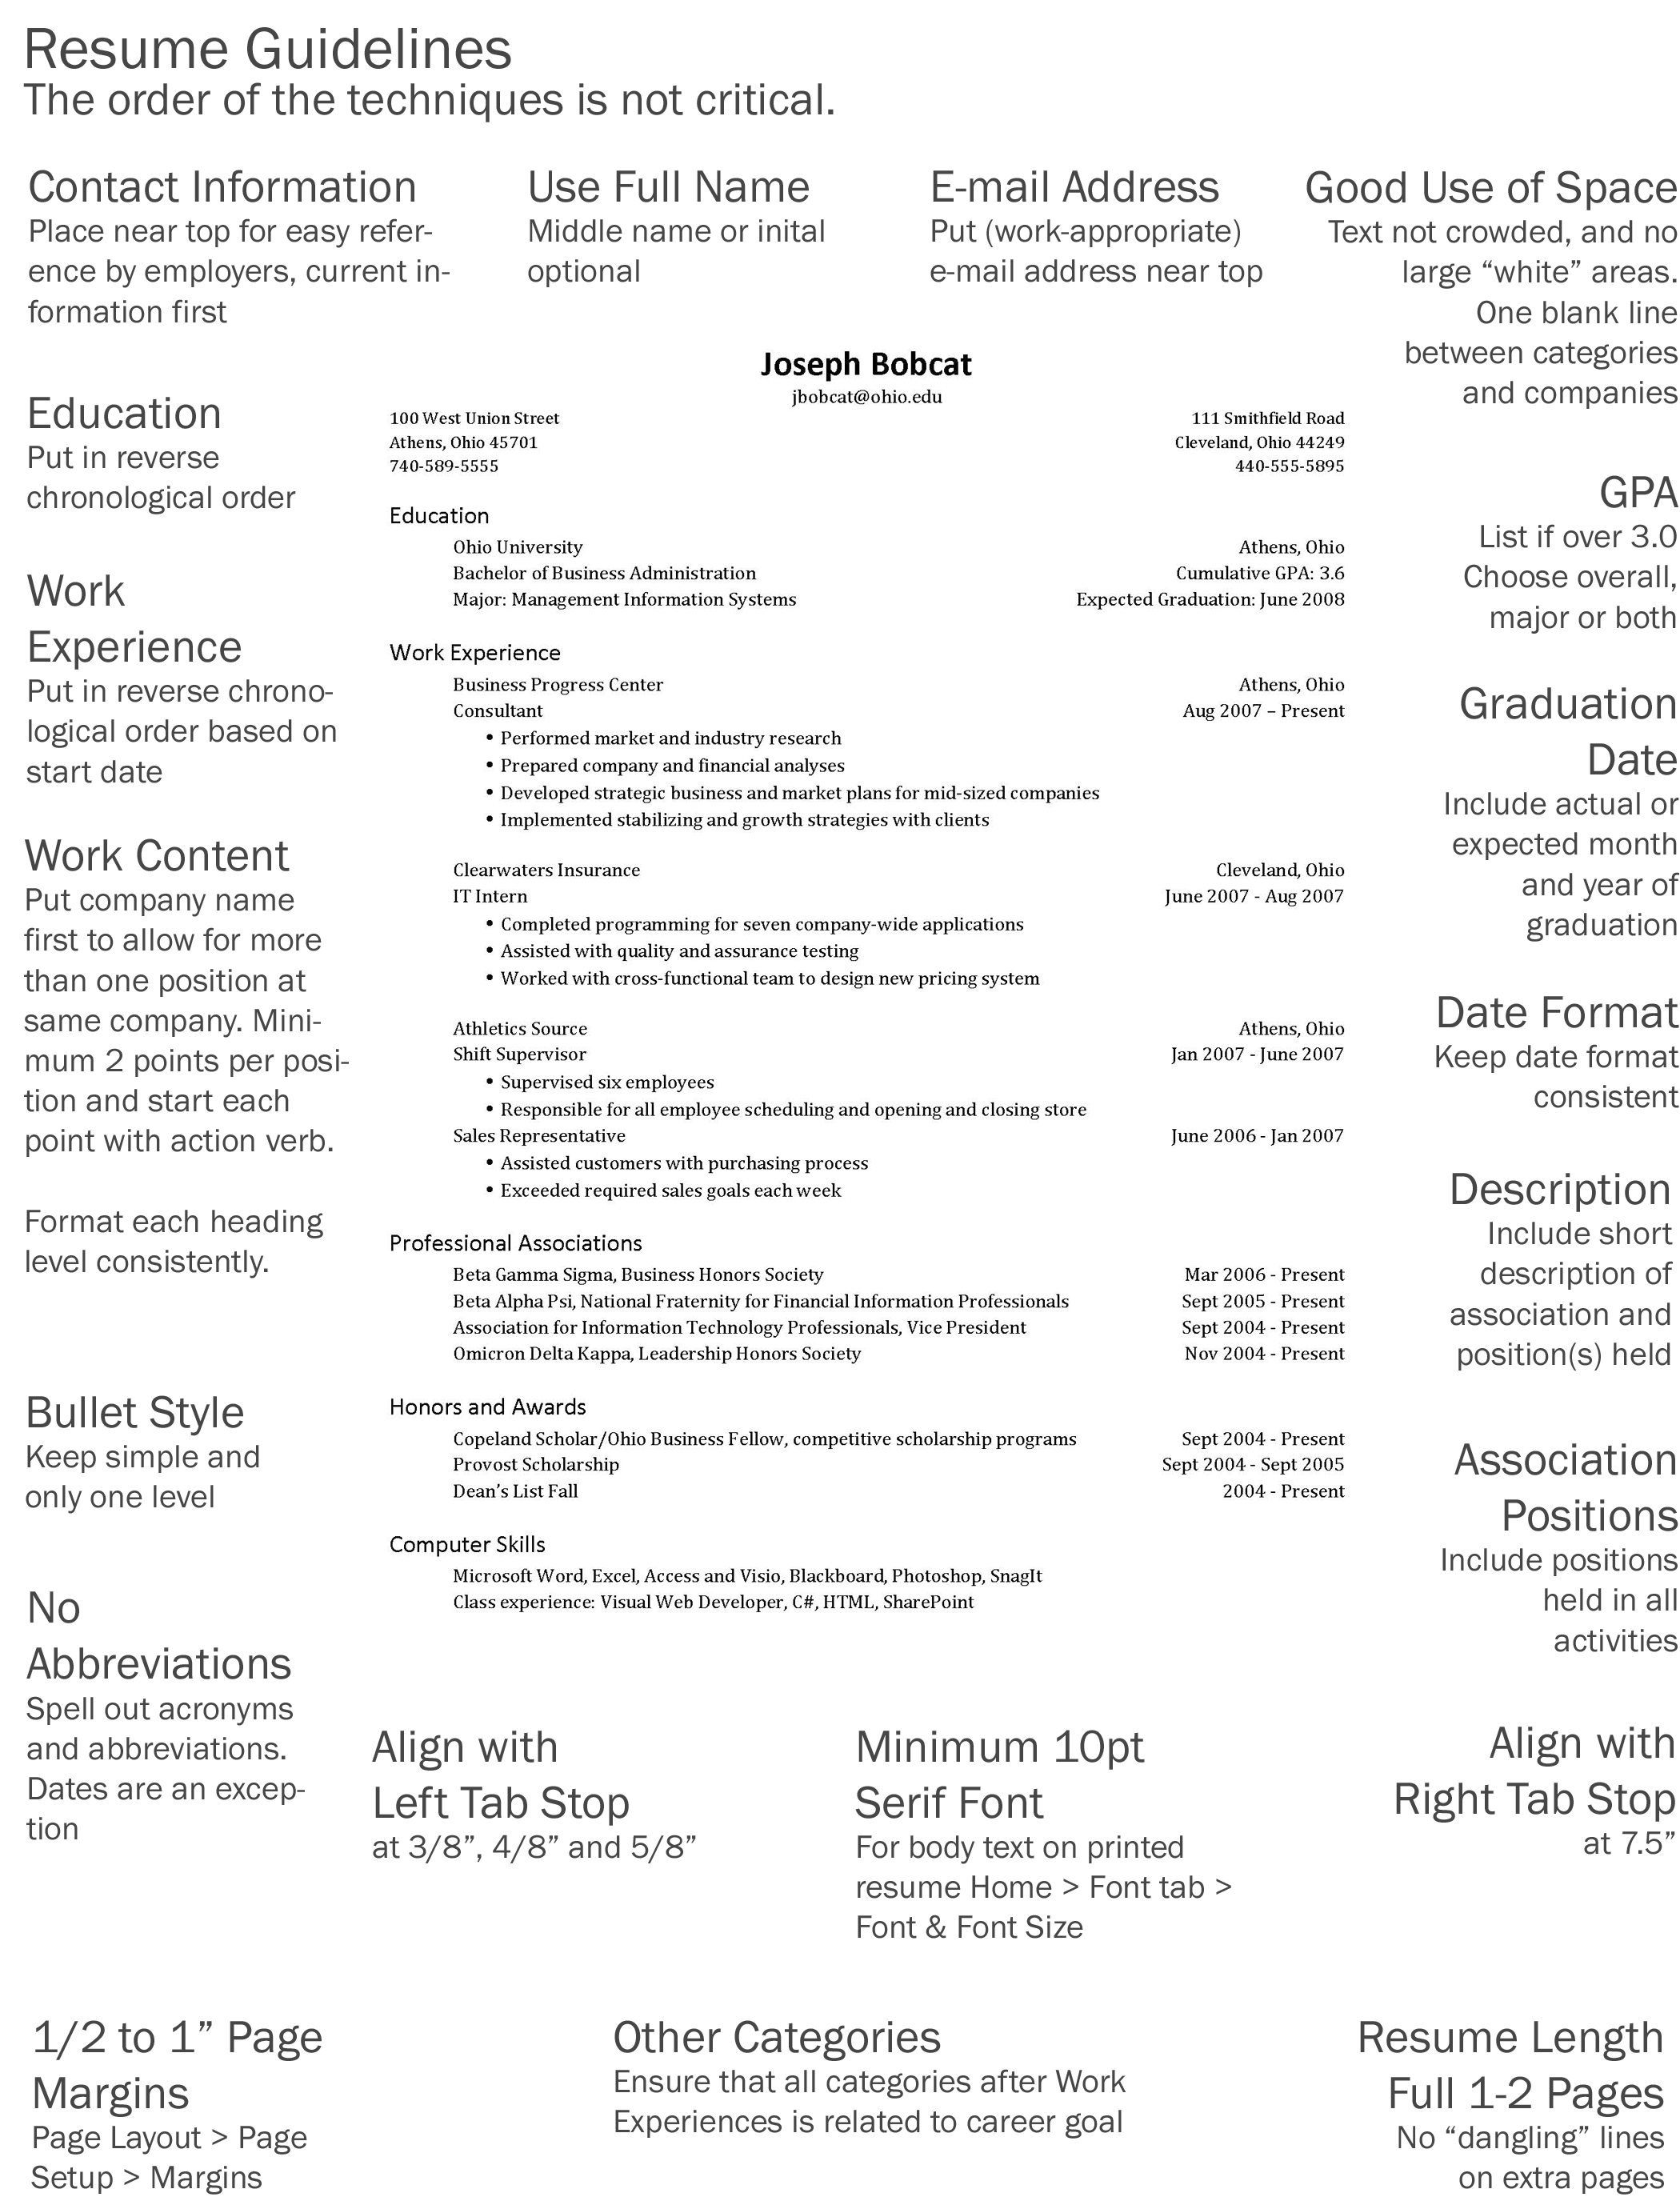 Resume professional activities examples